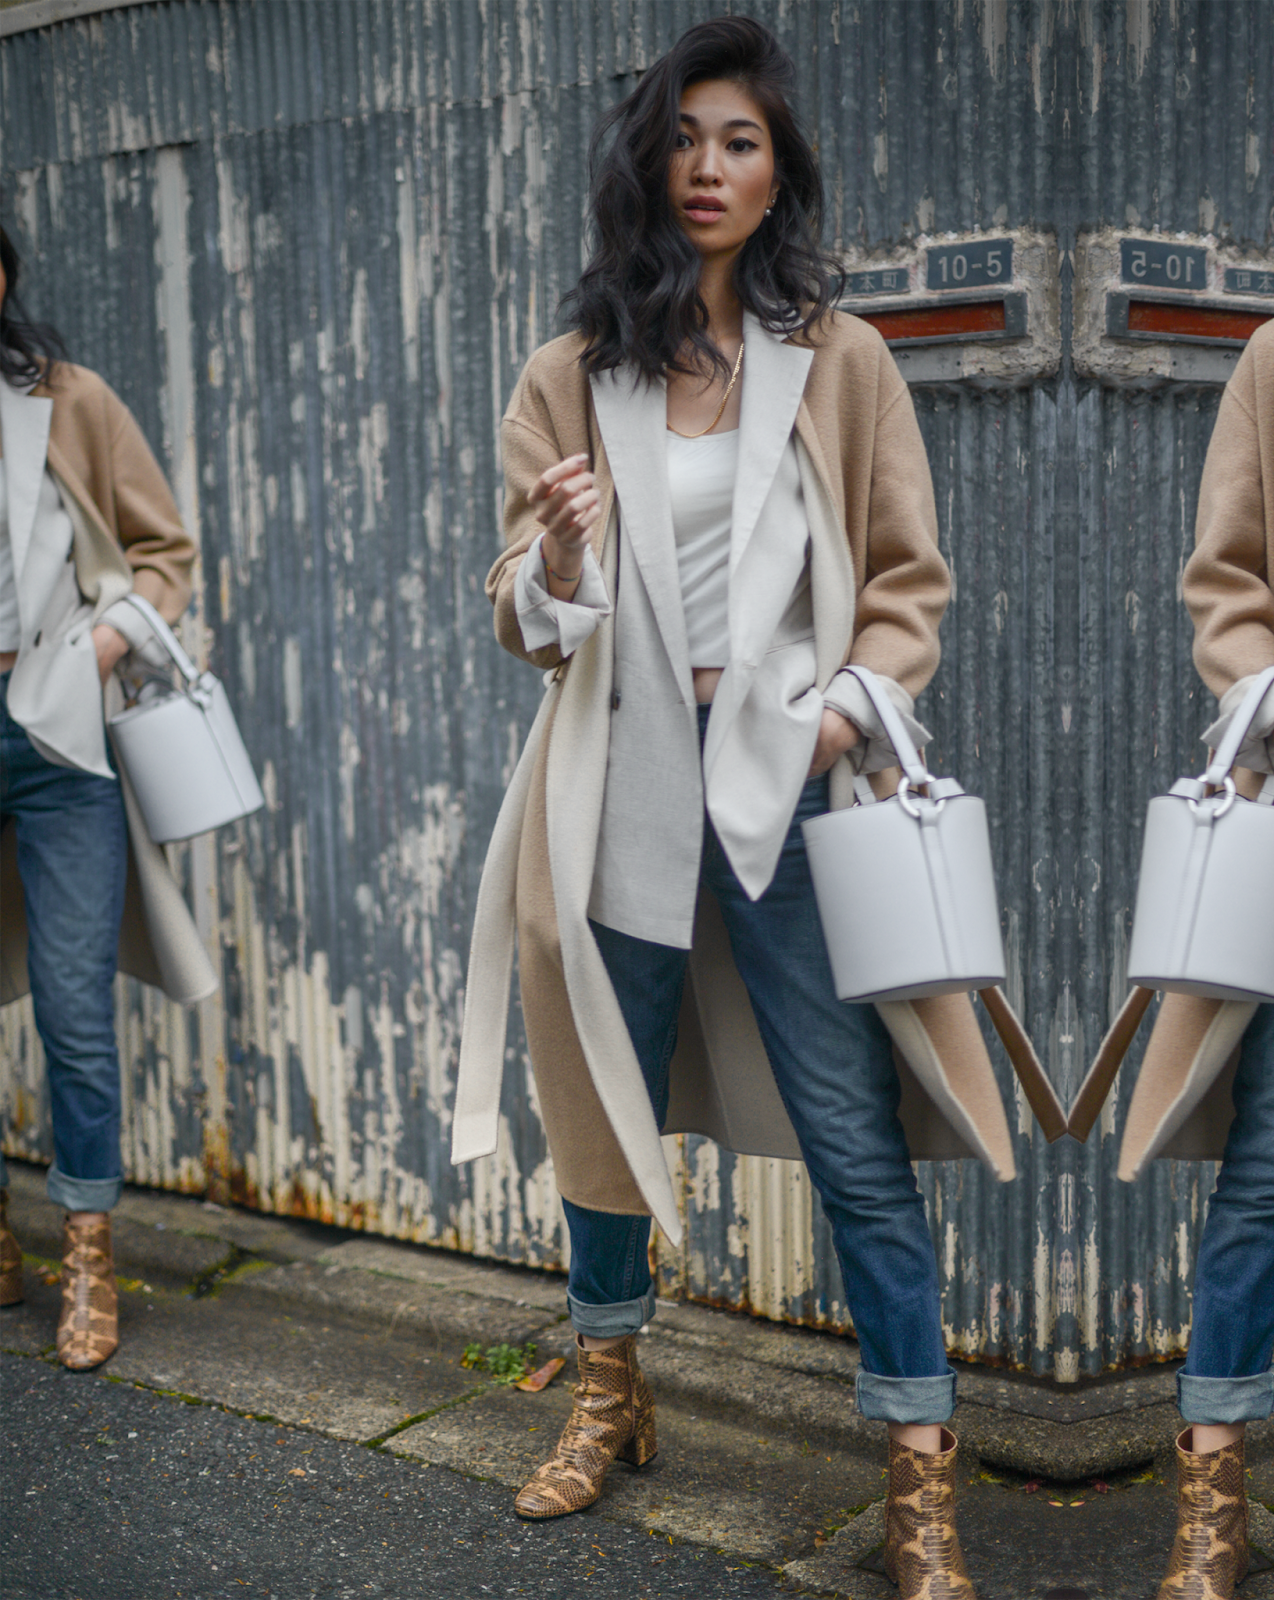 Double-faced beige coat, coat and blazer layering, personal style, snake skin booties, self portrait fashion blogger photos, FOREVERVANNY Style, Tokyo and New York Fashion Blogger, Van Le Fashion Blog - December Again / 122018